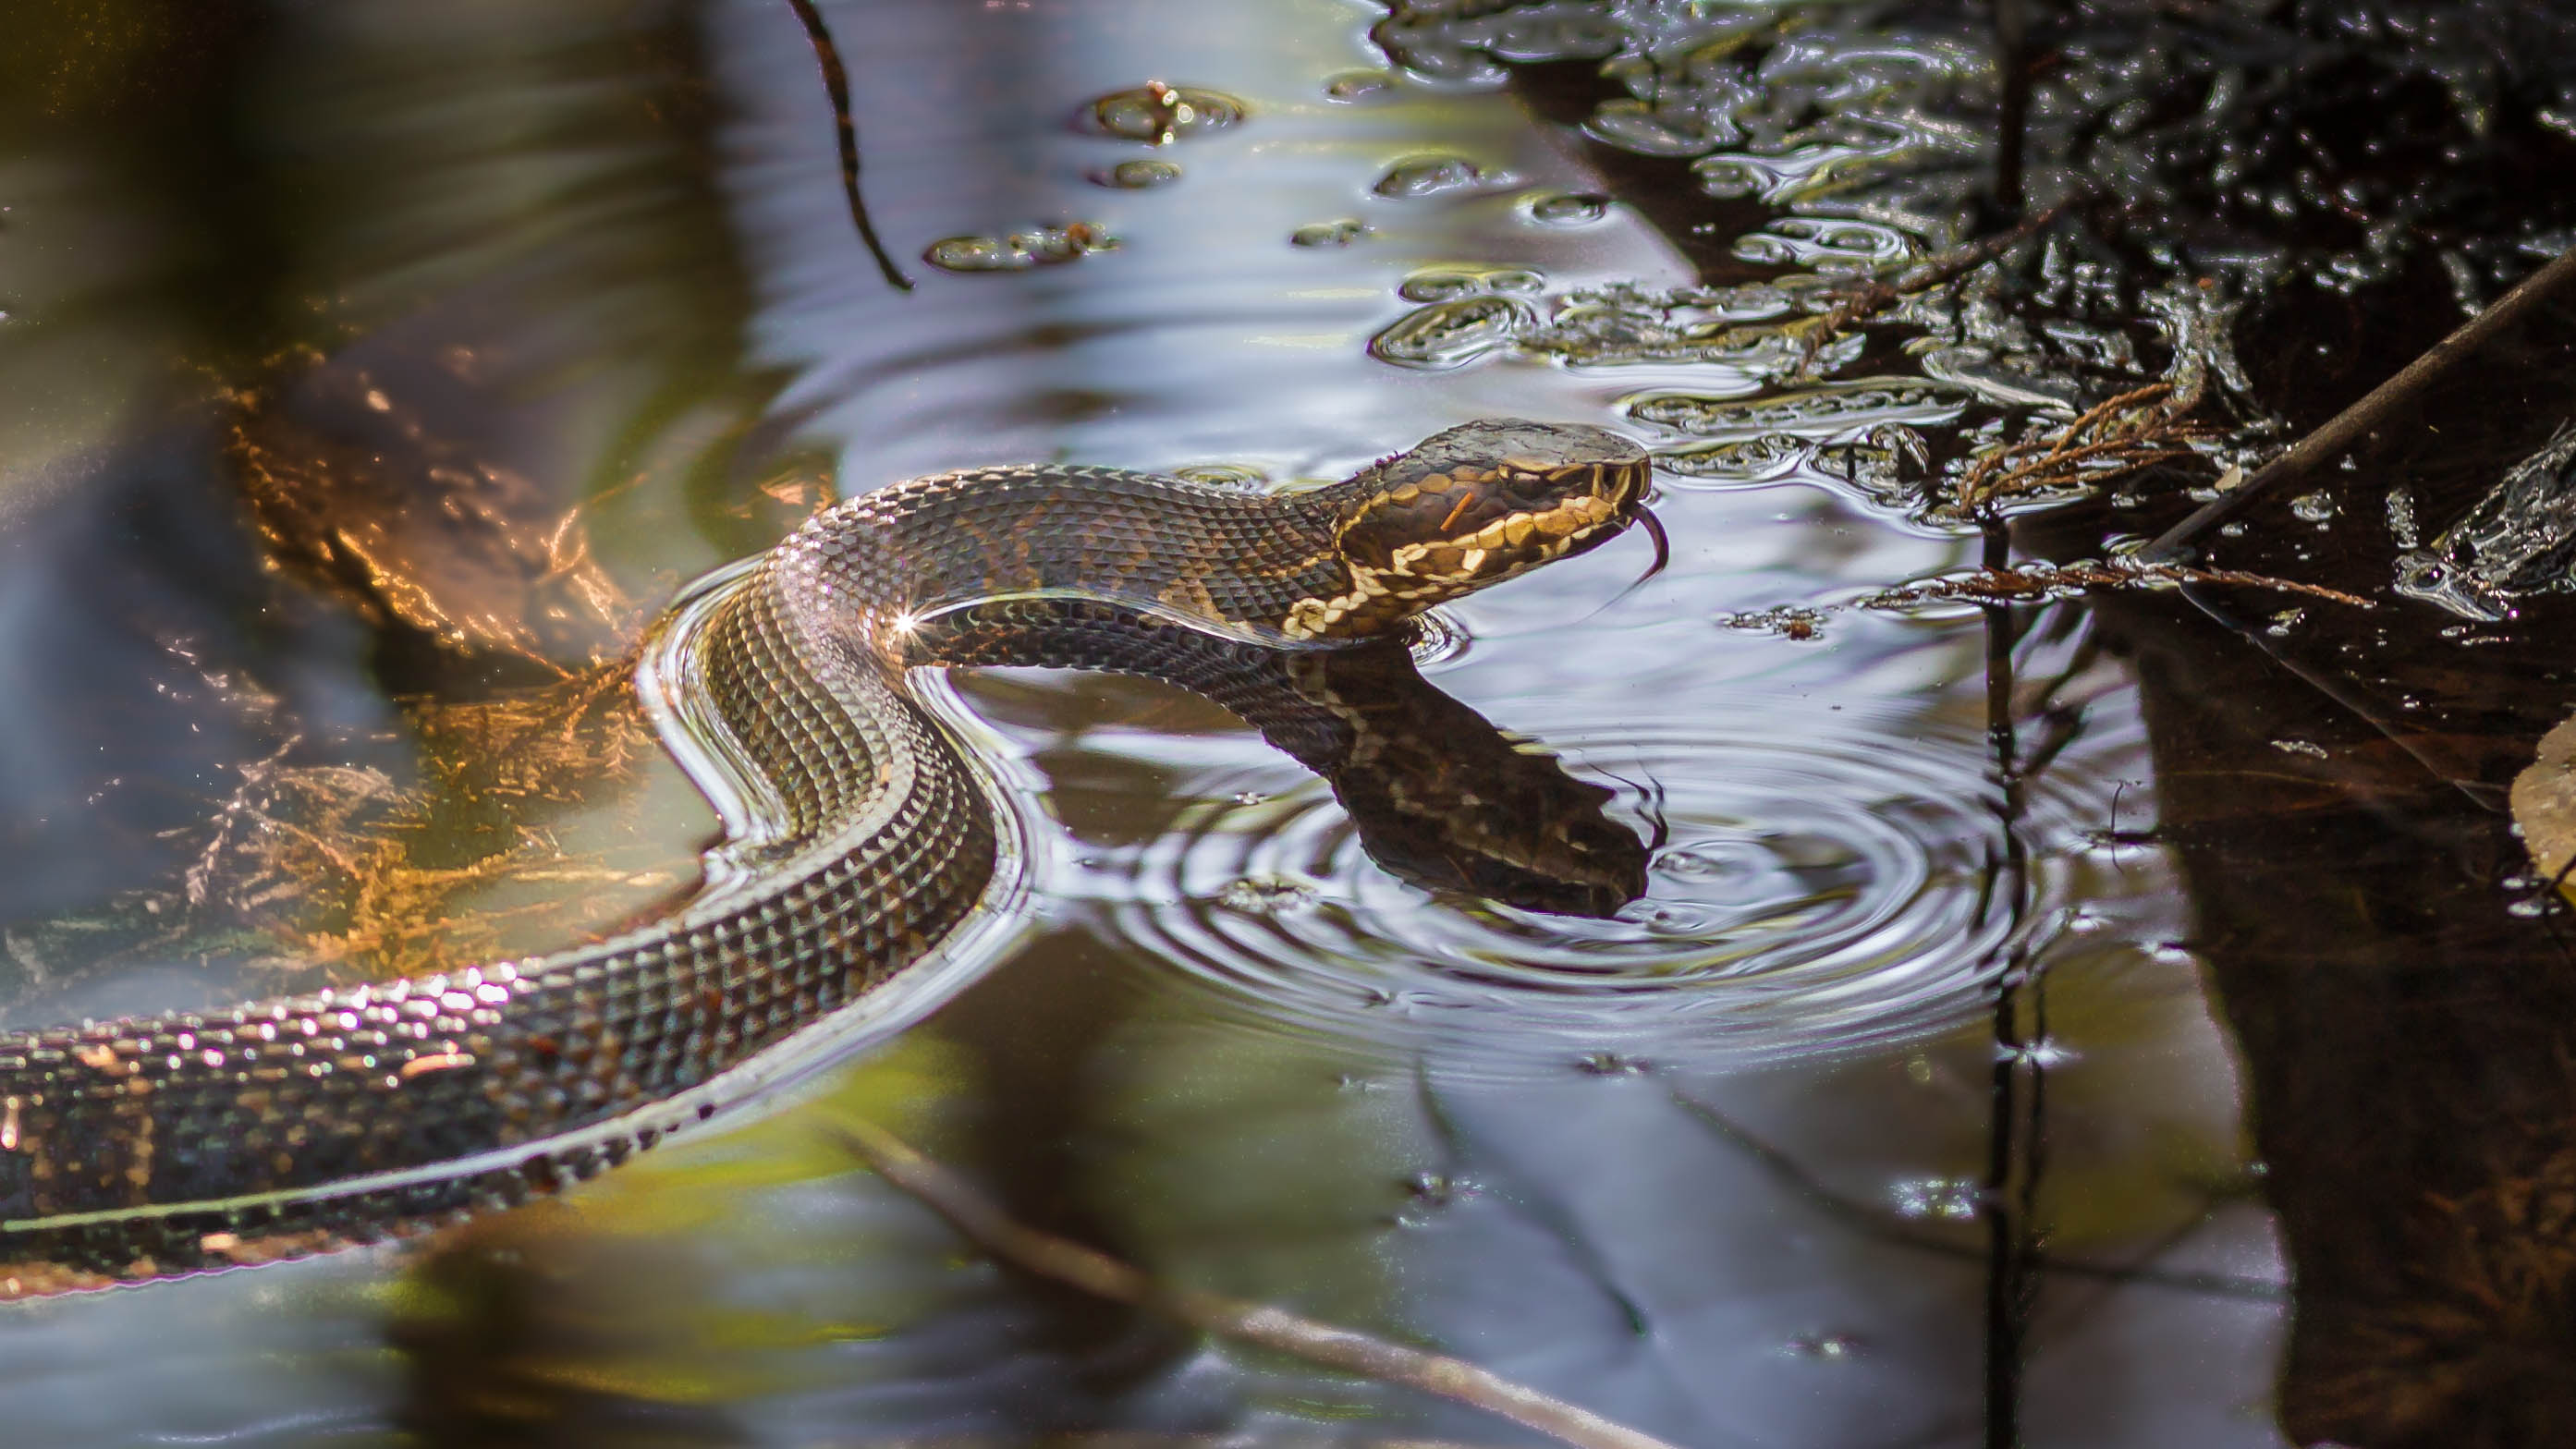 Cottonmouth snakes, or water moccasins, are known to live in southern Virginia Beach and Chesapeake, according to Virginia's Department of Conservation and Recreation. (Image: Jo Crebbin via Shutterstock)